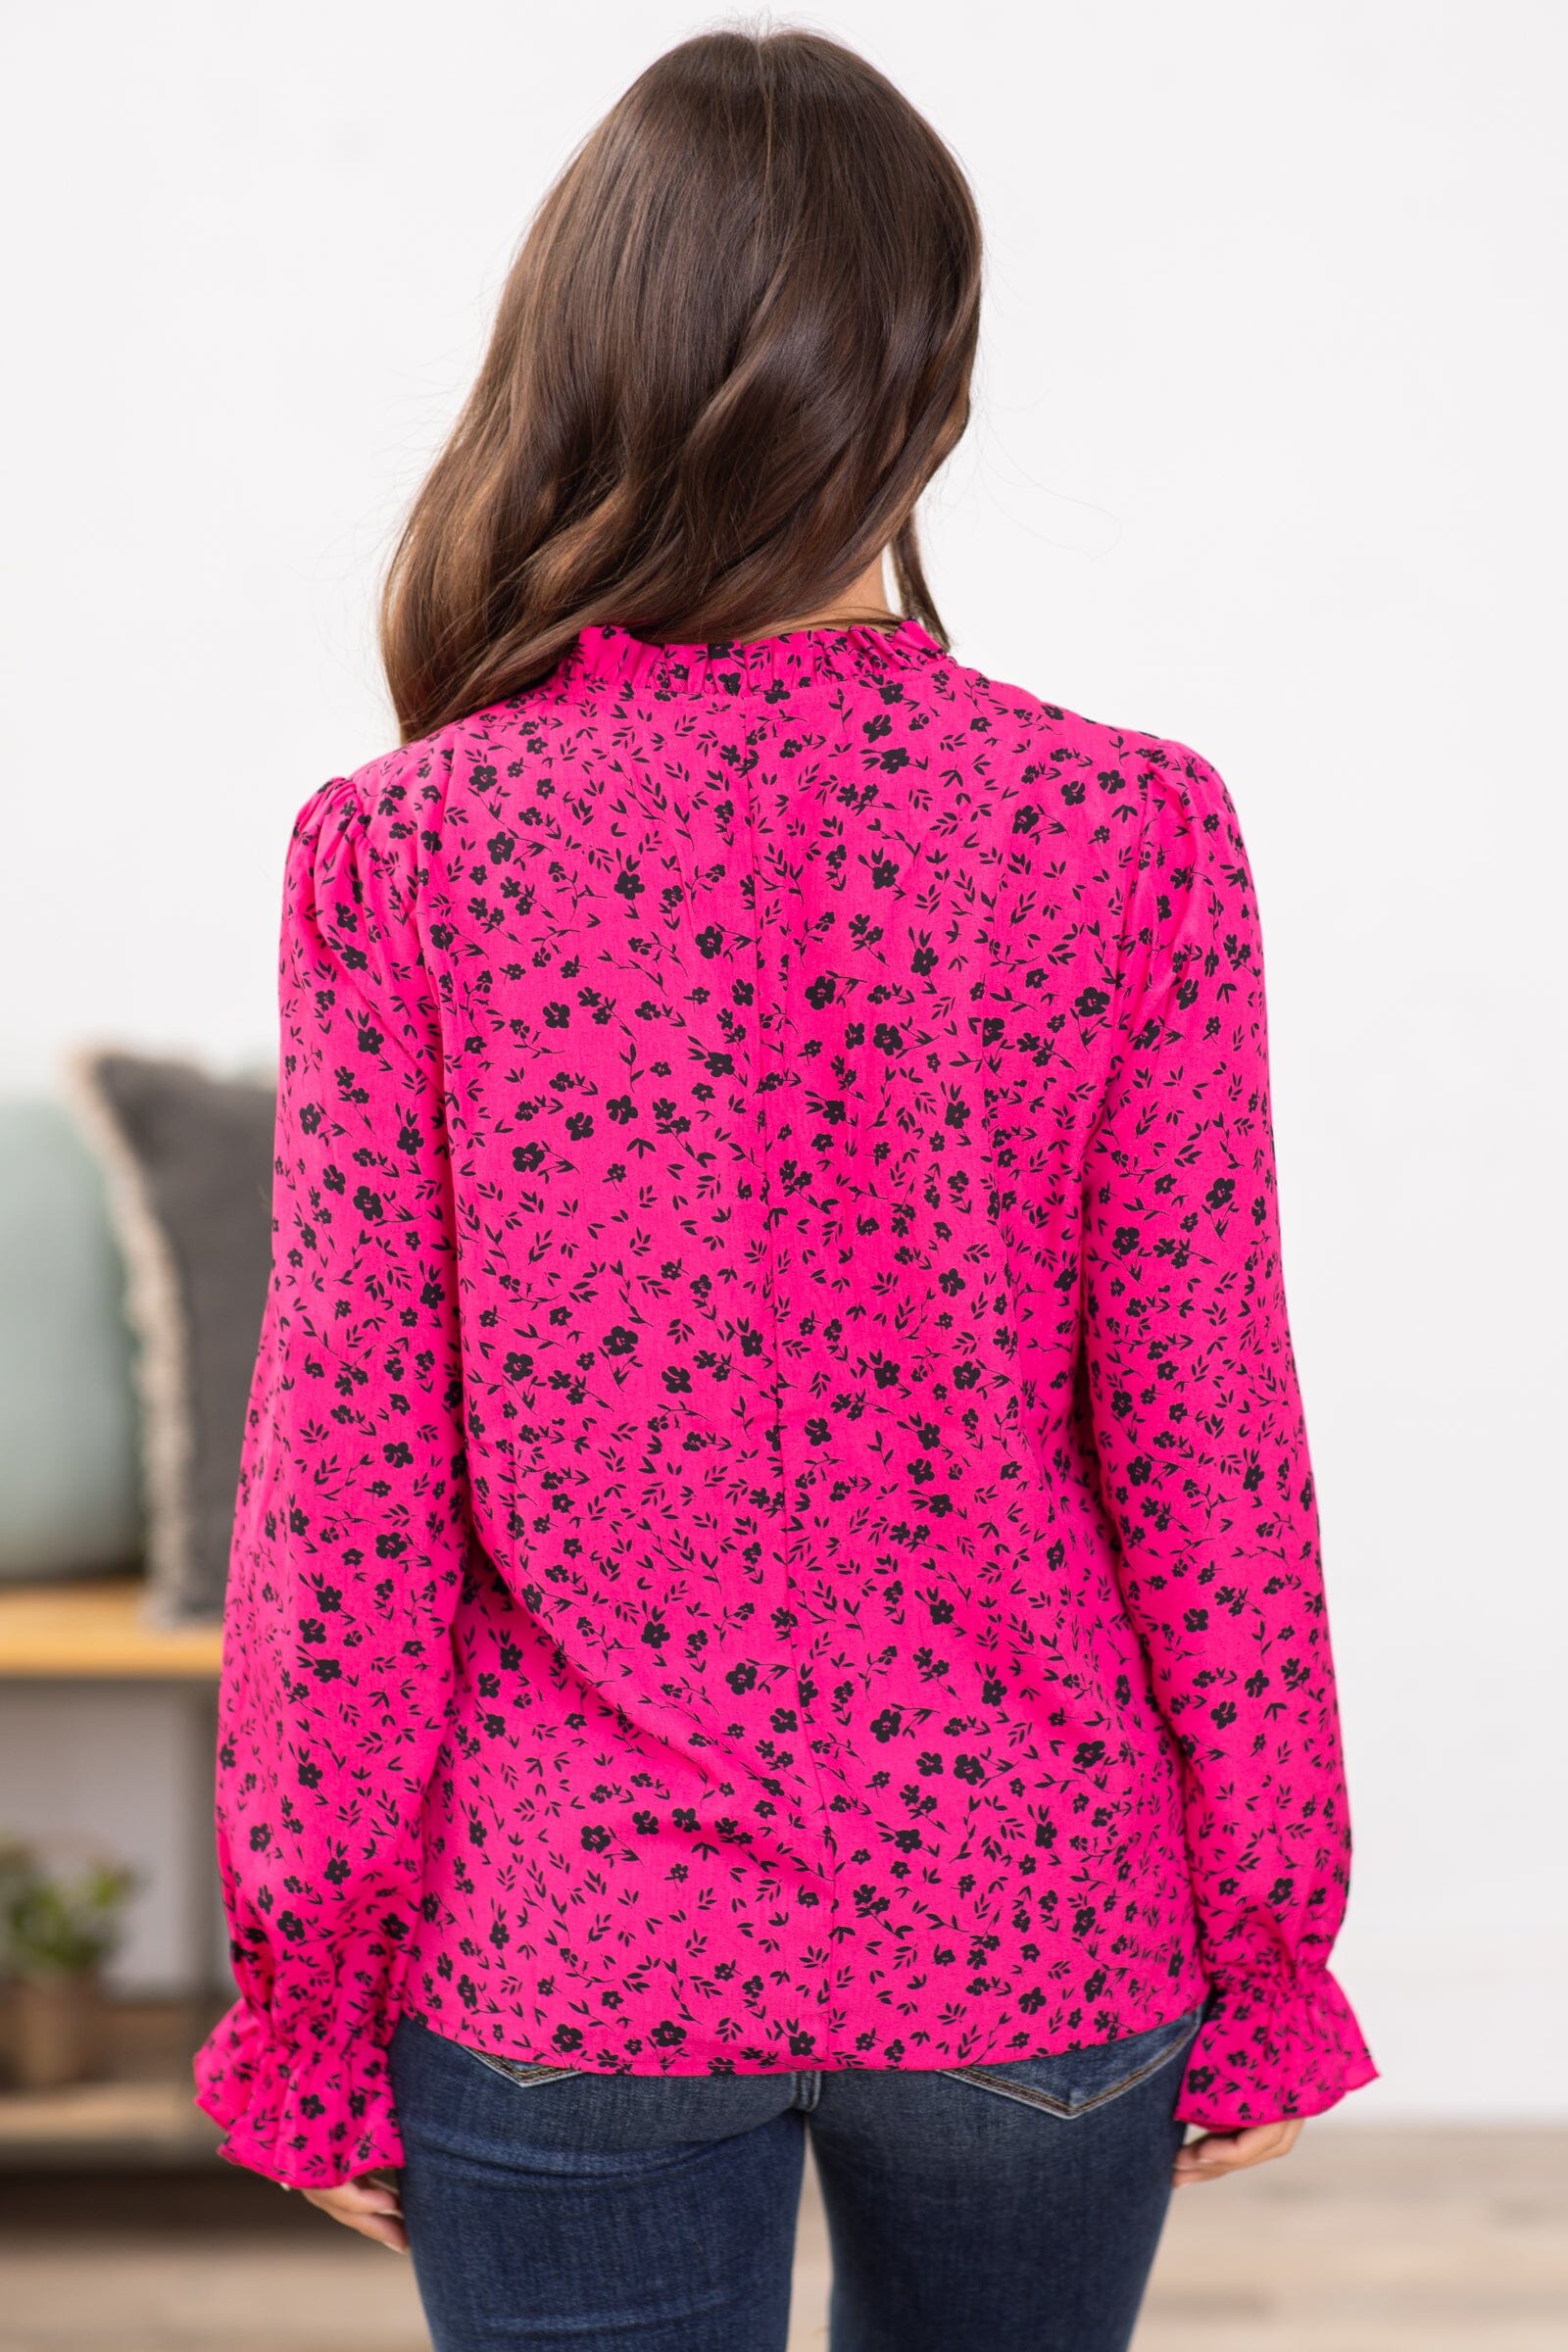 Hot Pink and Black Ditsy Floral Print Top - Filly Flair